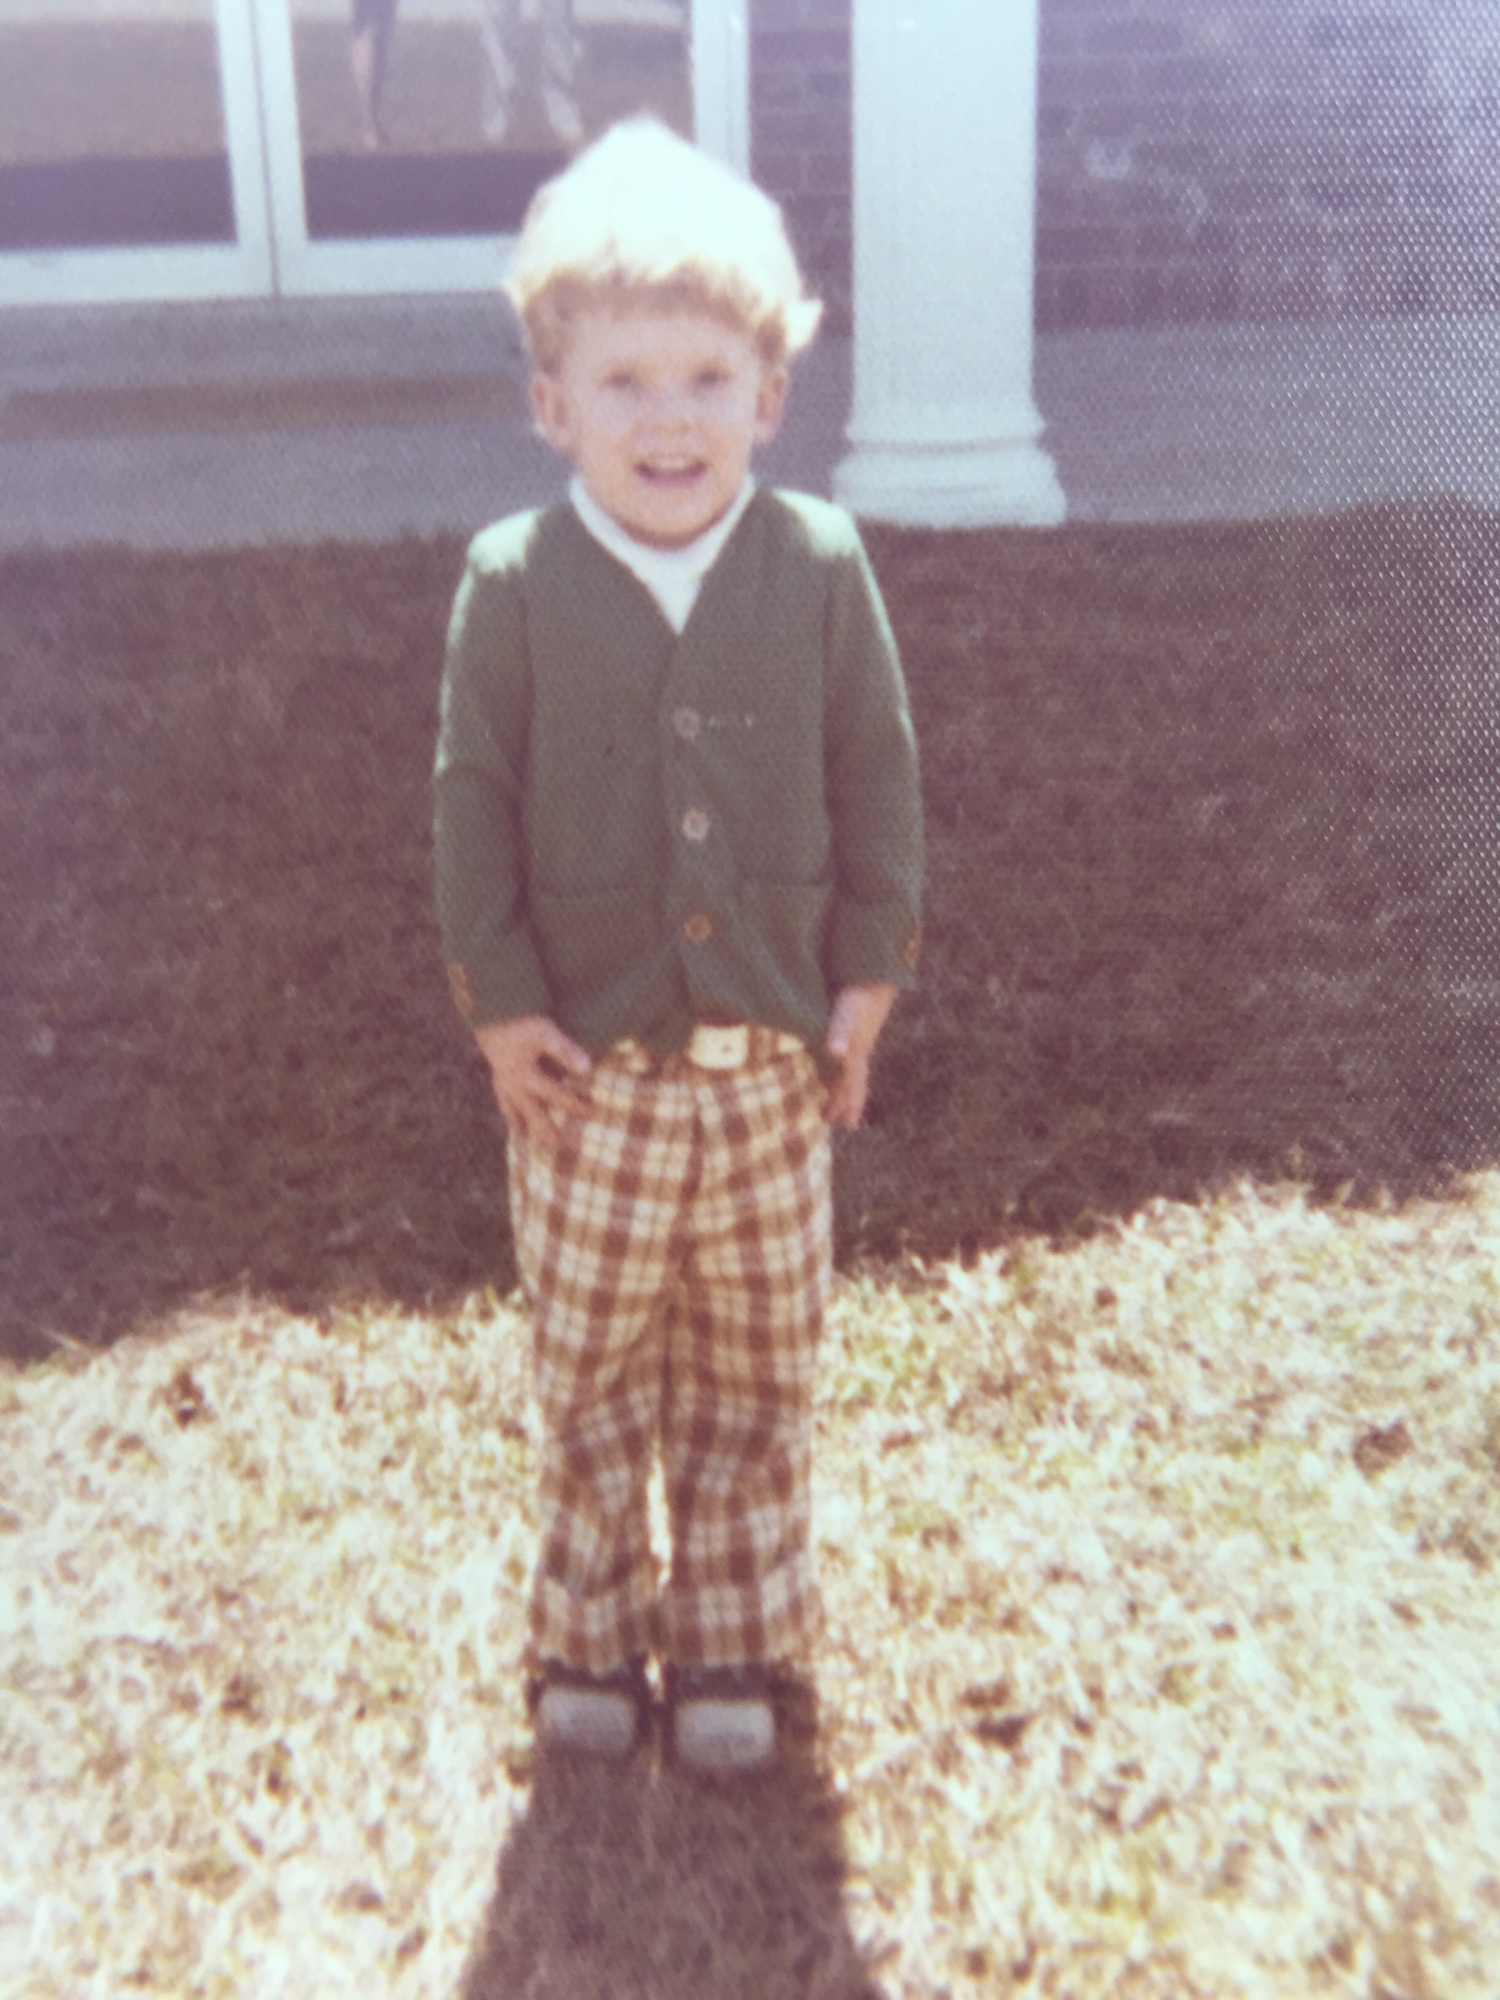 Although Masengale received his first adult pair of crazy pants in 2012, he recently found this photo of himself at age 4 with some fairly crazy plaid pants. 